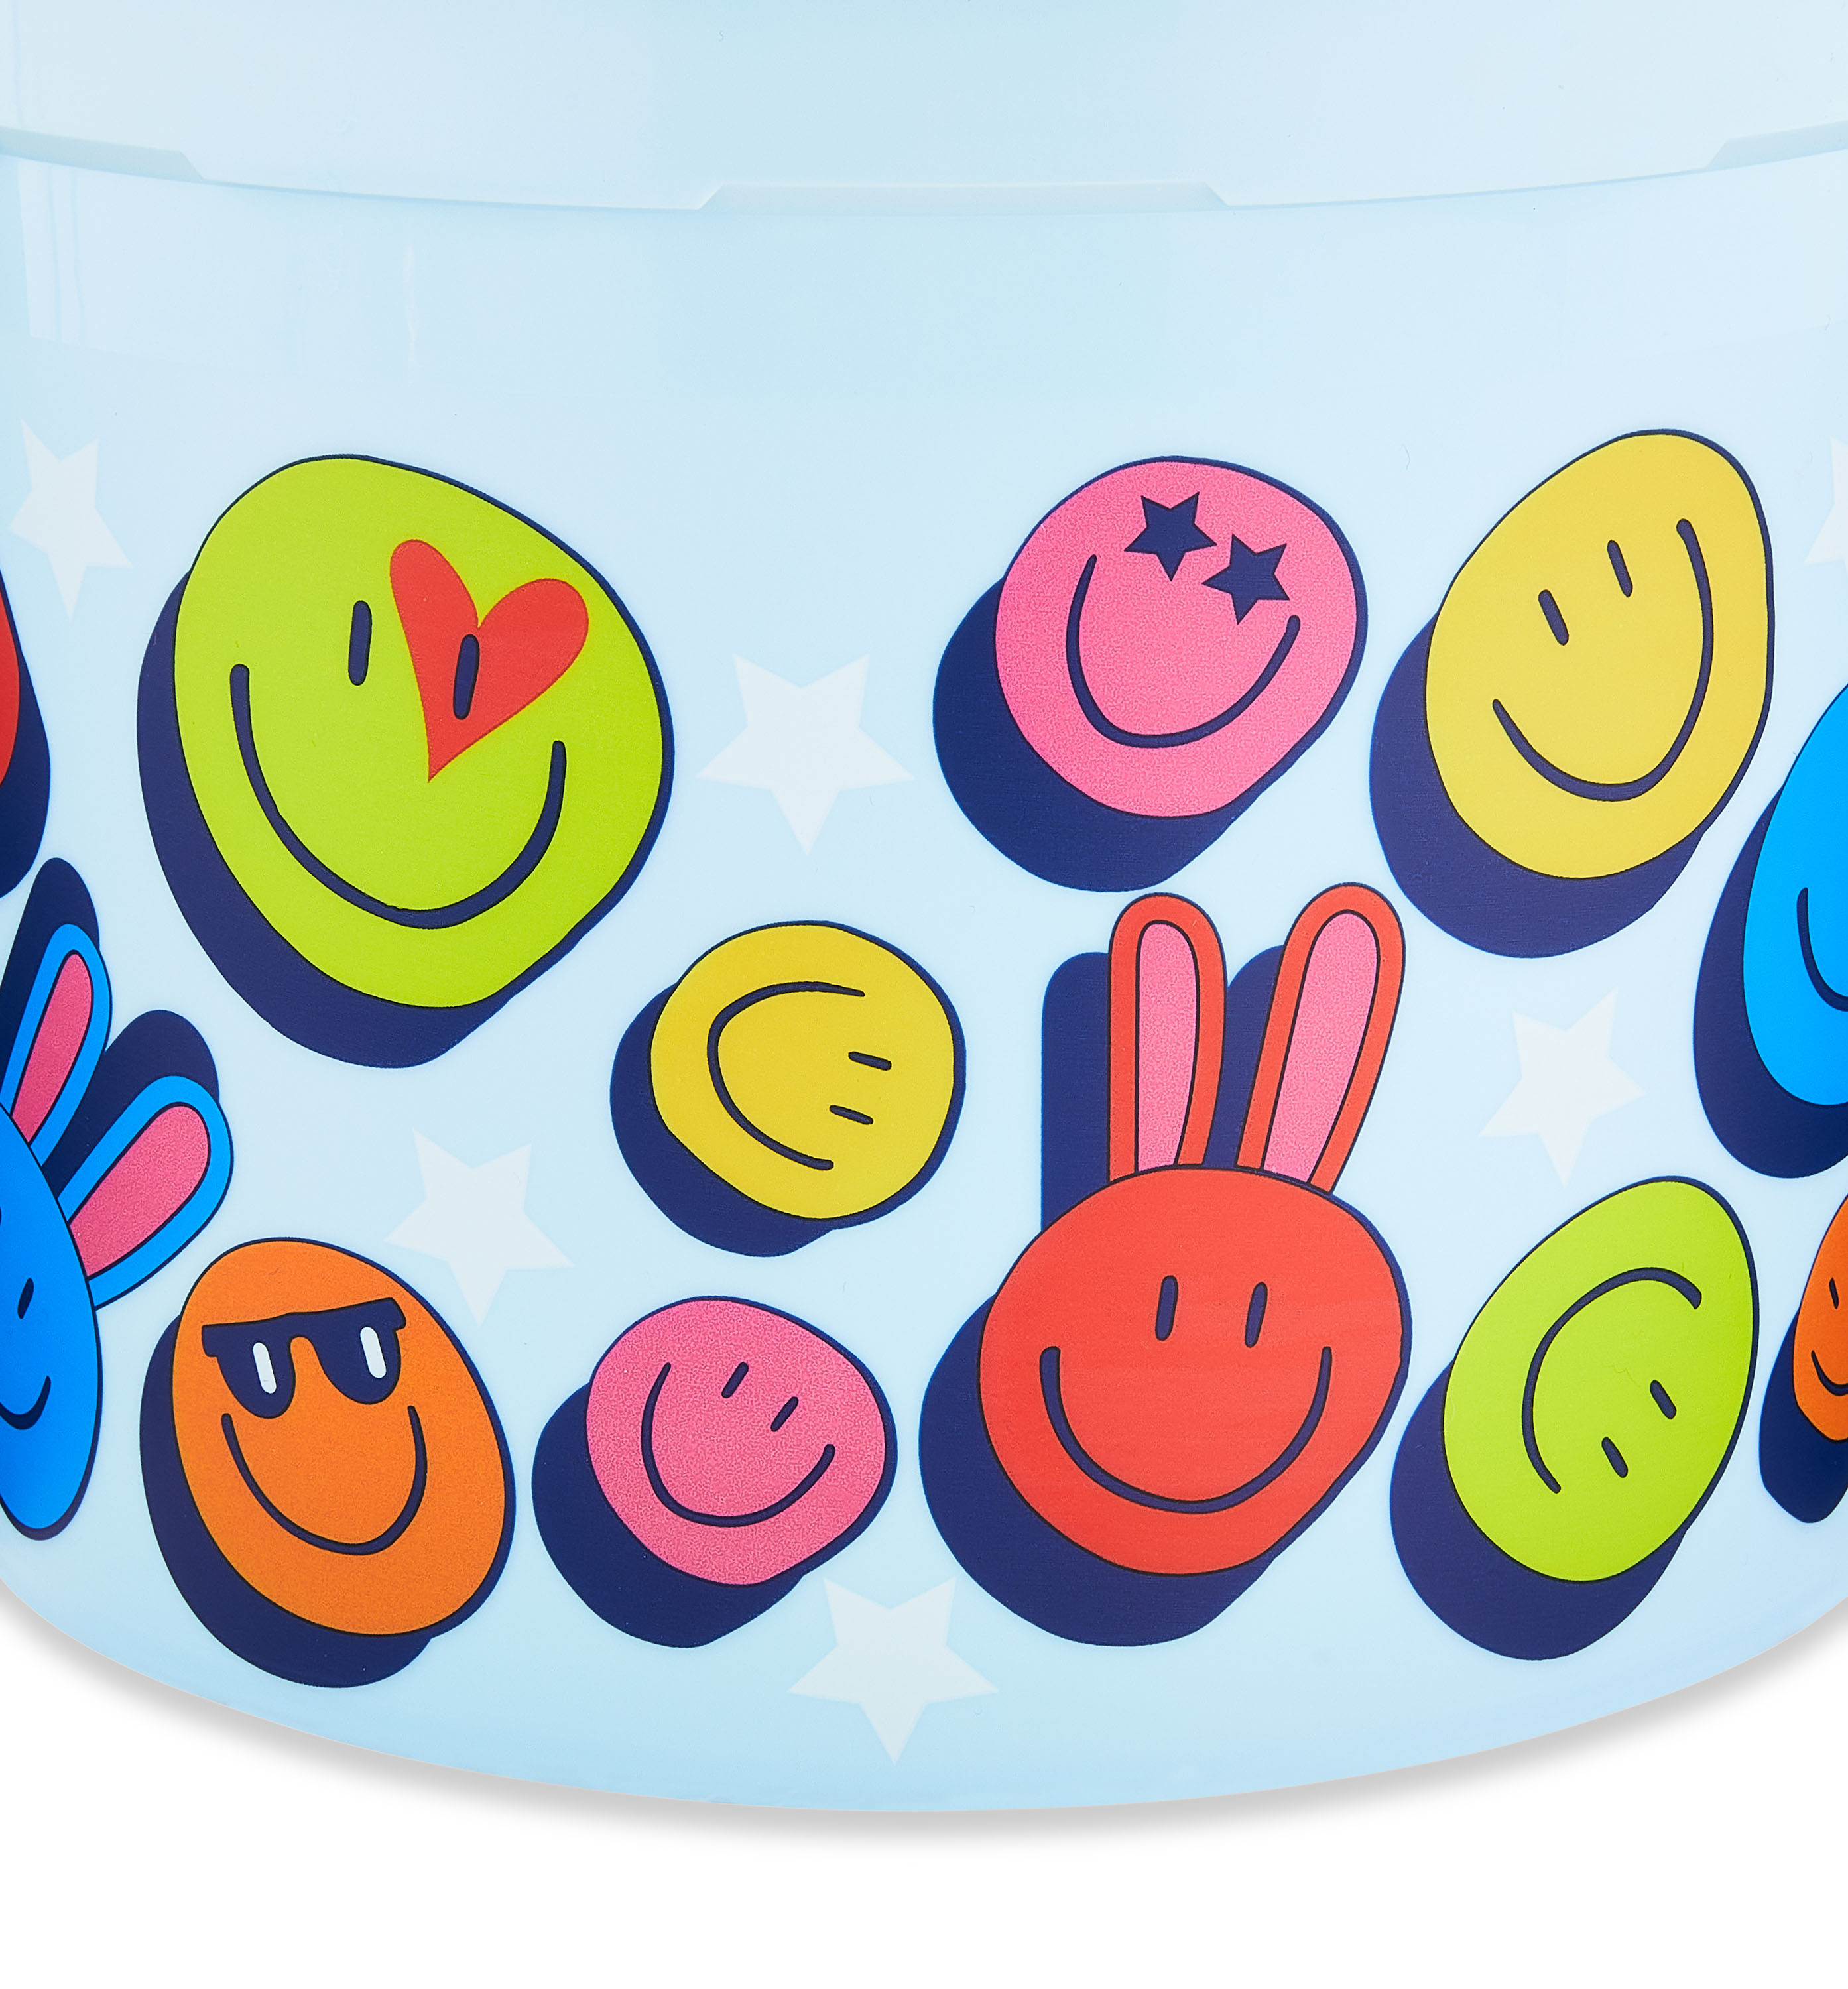 Easter 5-Quart Plastic Bucket, Blue Smileys, by Way To Celebrate - image 2 of 5